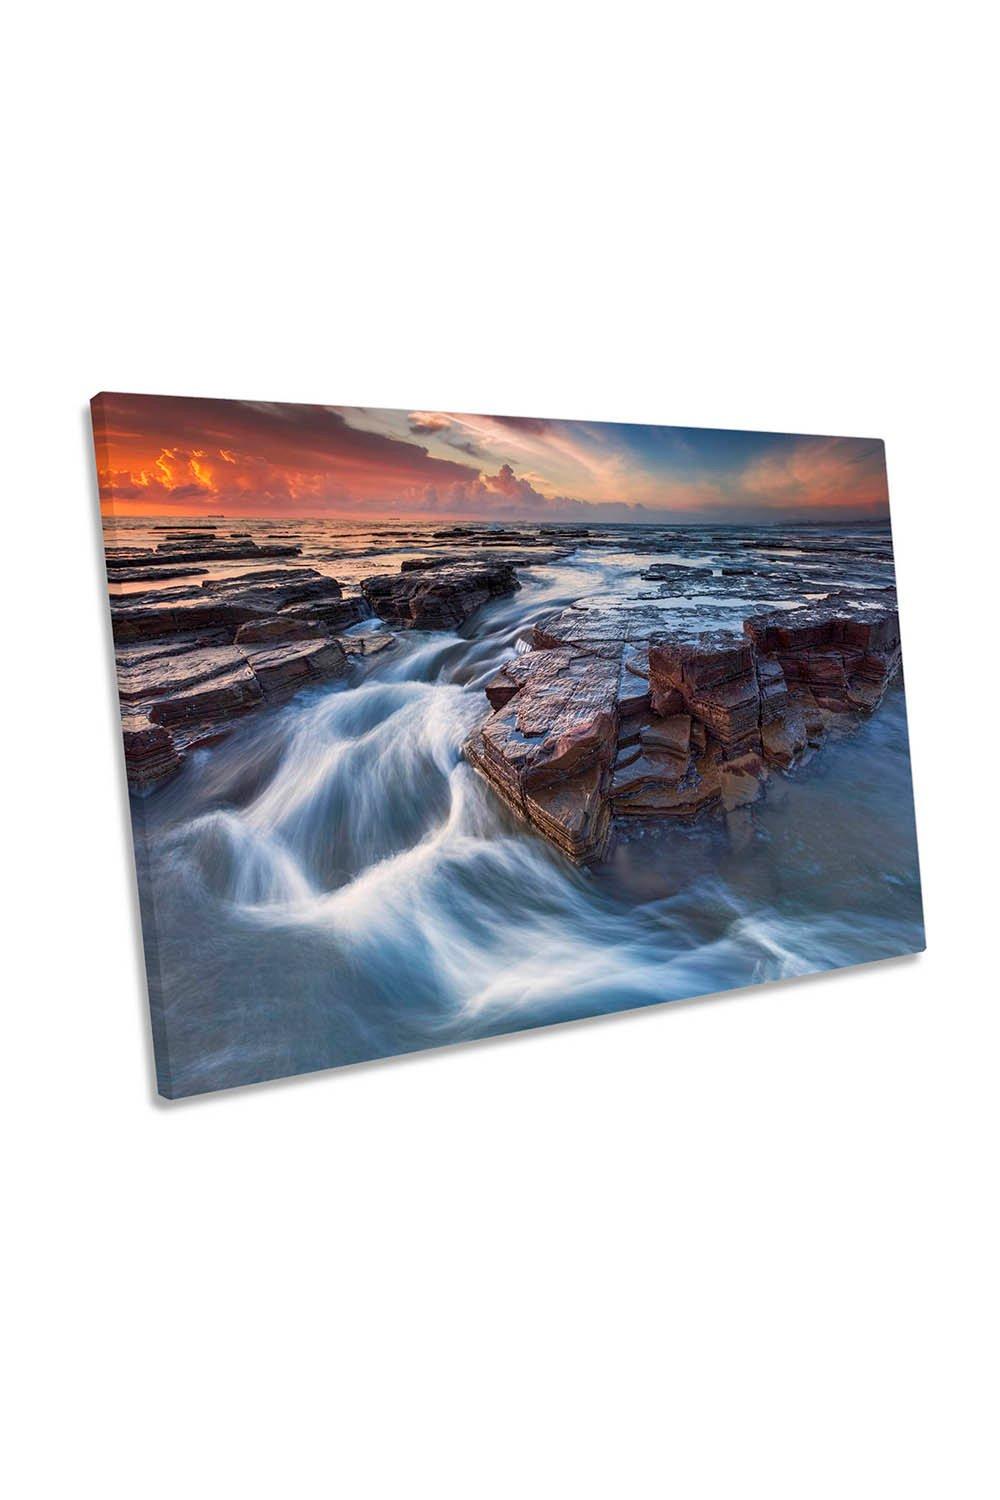 Dance of Water Seascape Orange Canvas Wall Art Picture Print